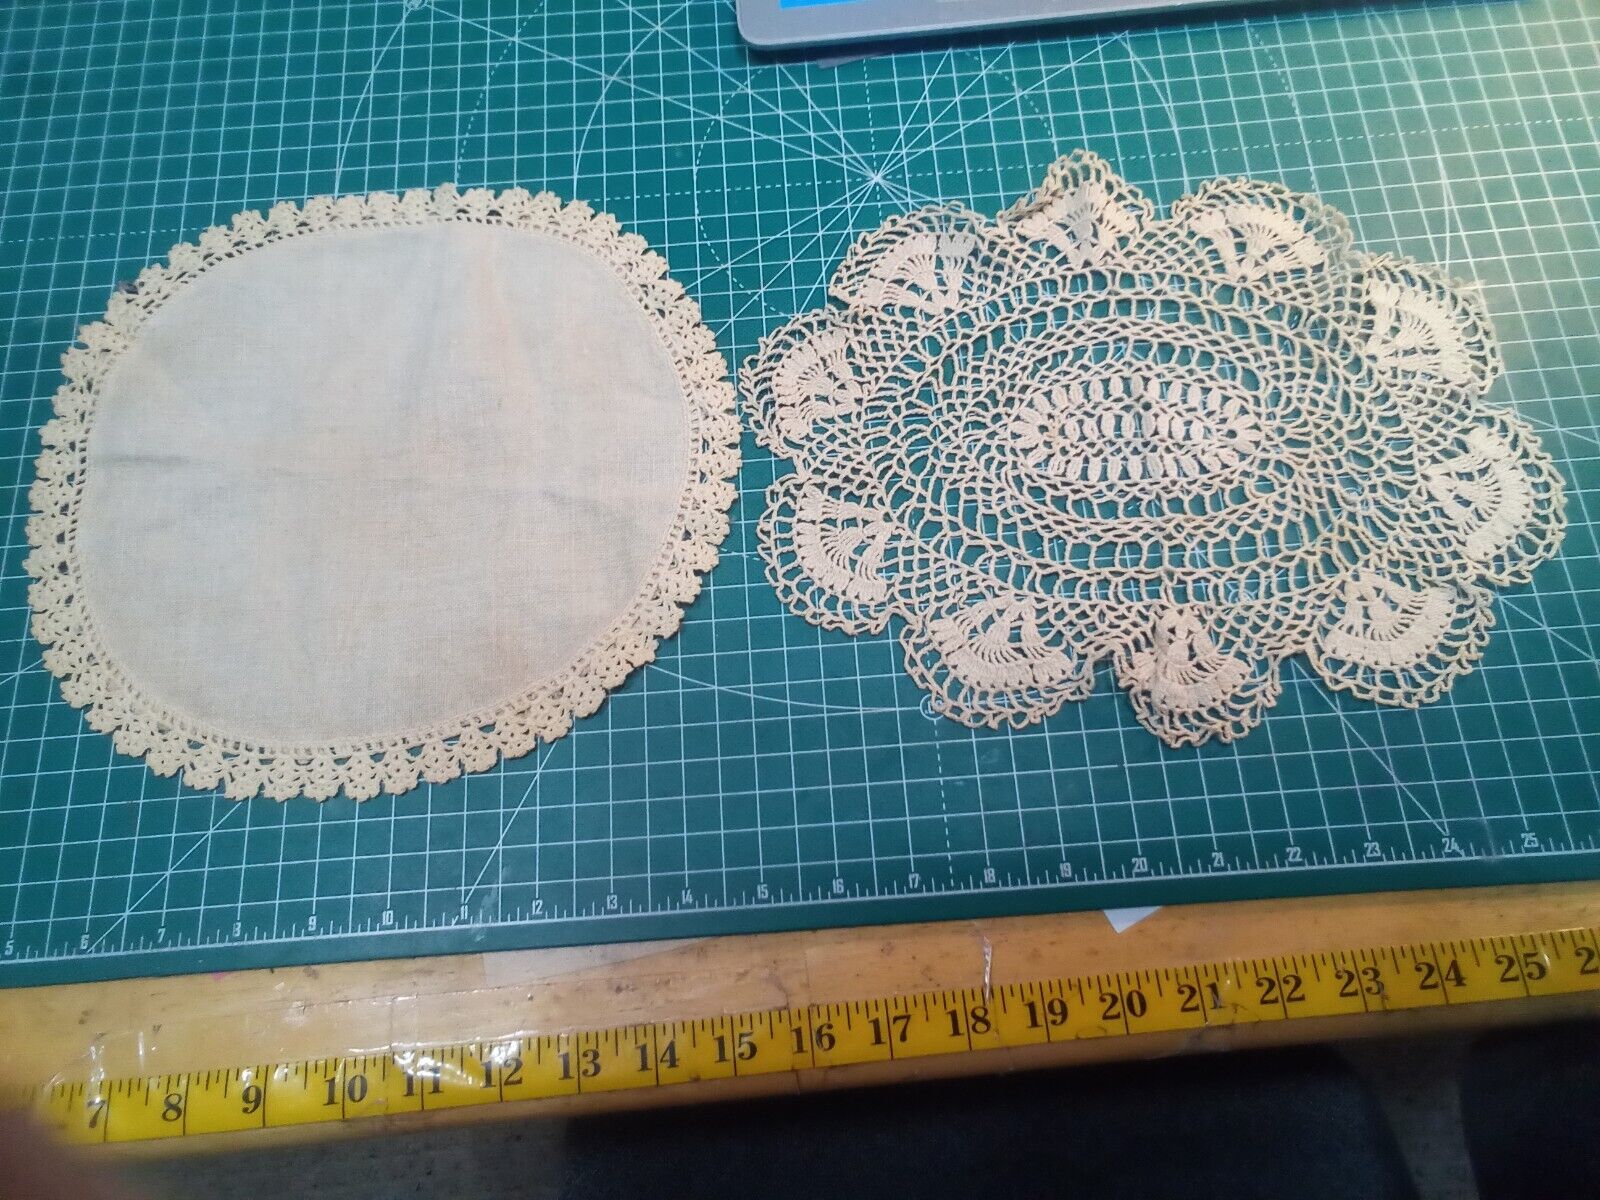 Vintage Crocheted Round Doilies Beige Oval 11